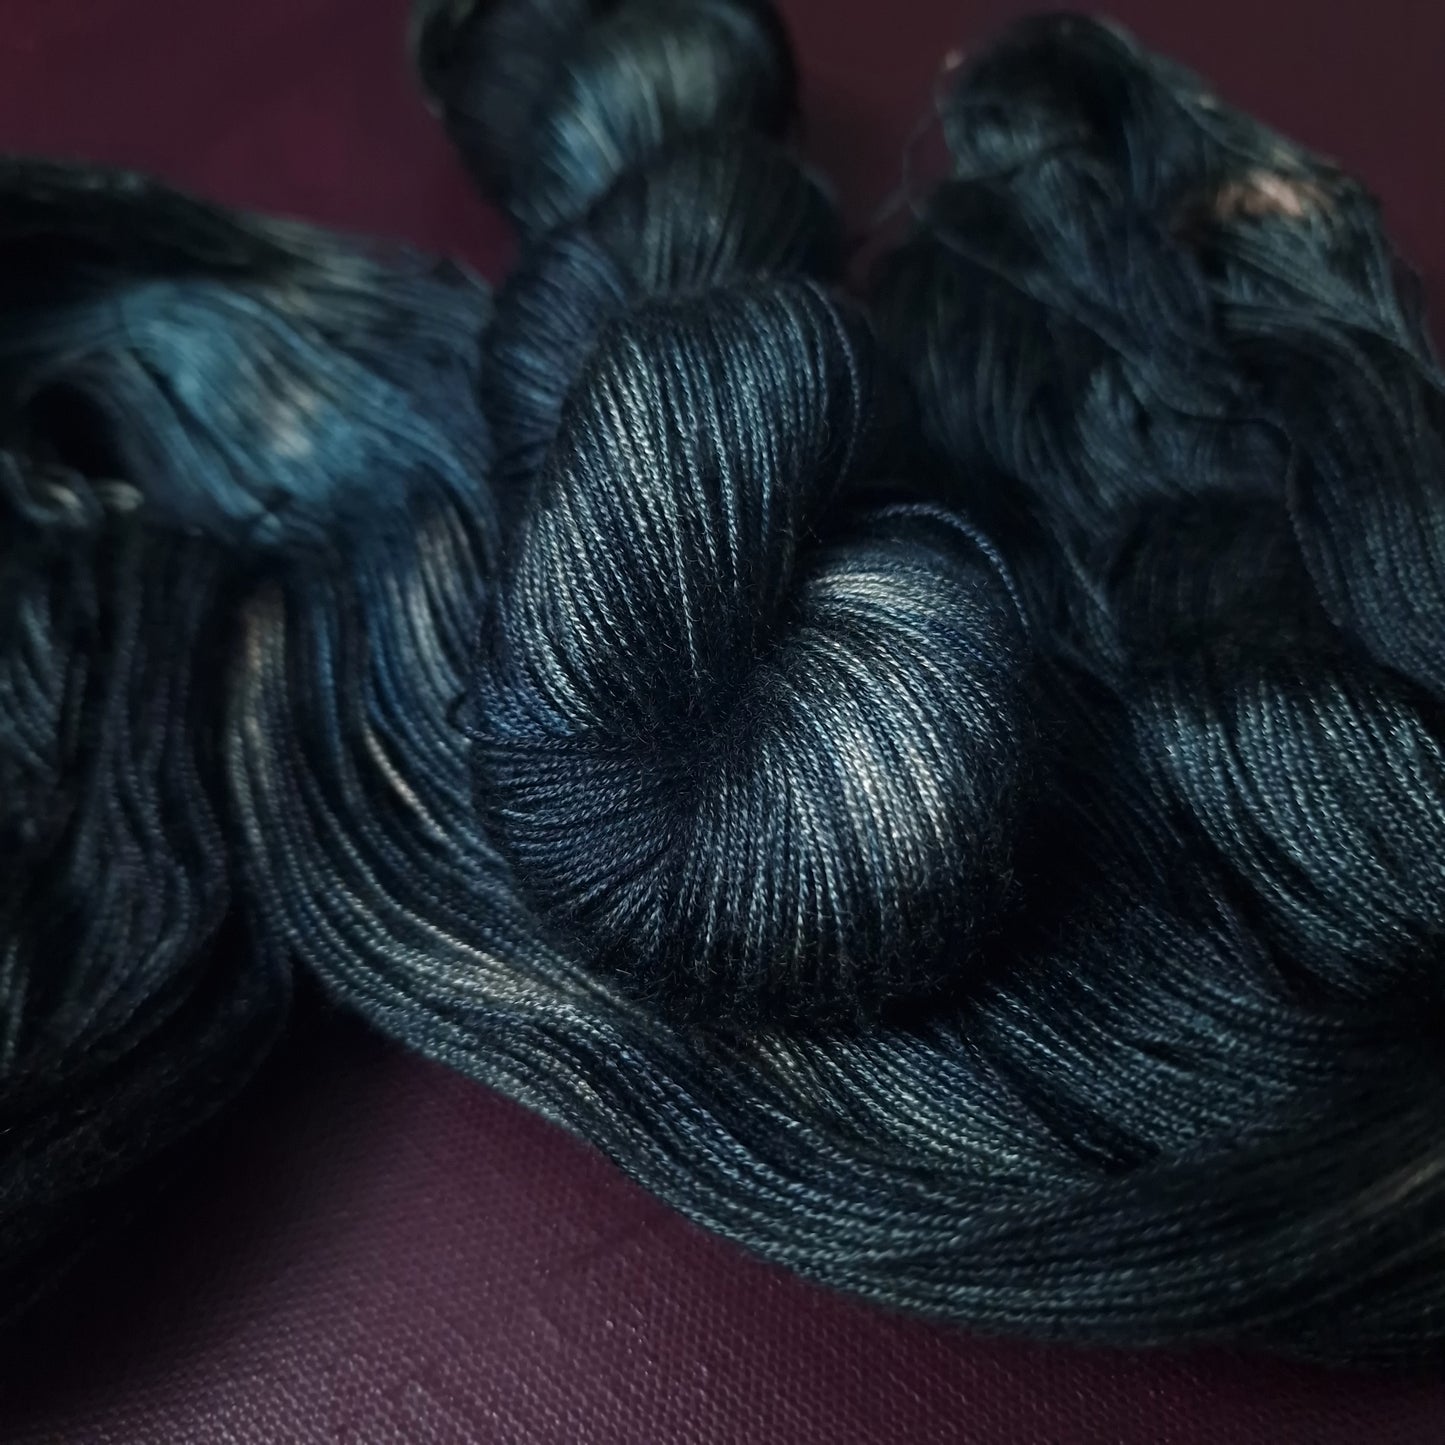 Hand dyed yarn ~ Midnight Eyes ~ fingering weight tencel yarn, hand painted, indie dyed, gift for knitter